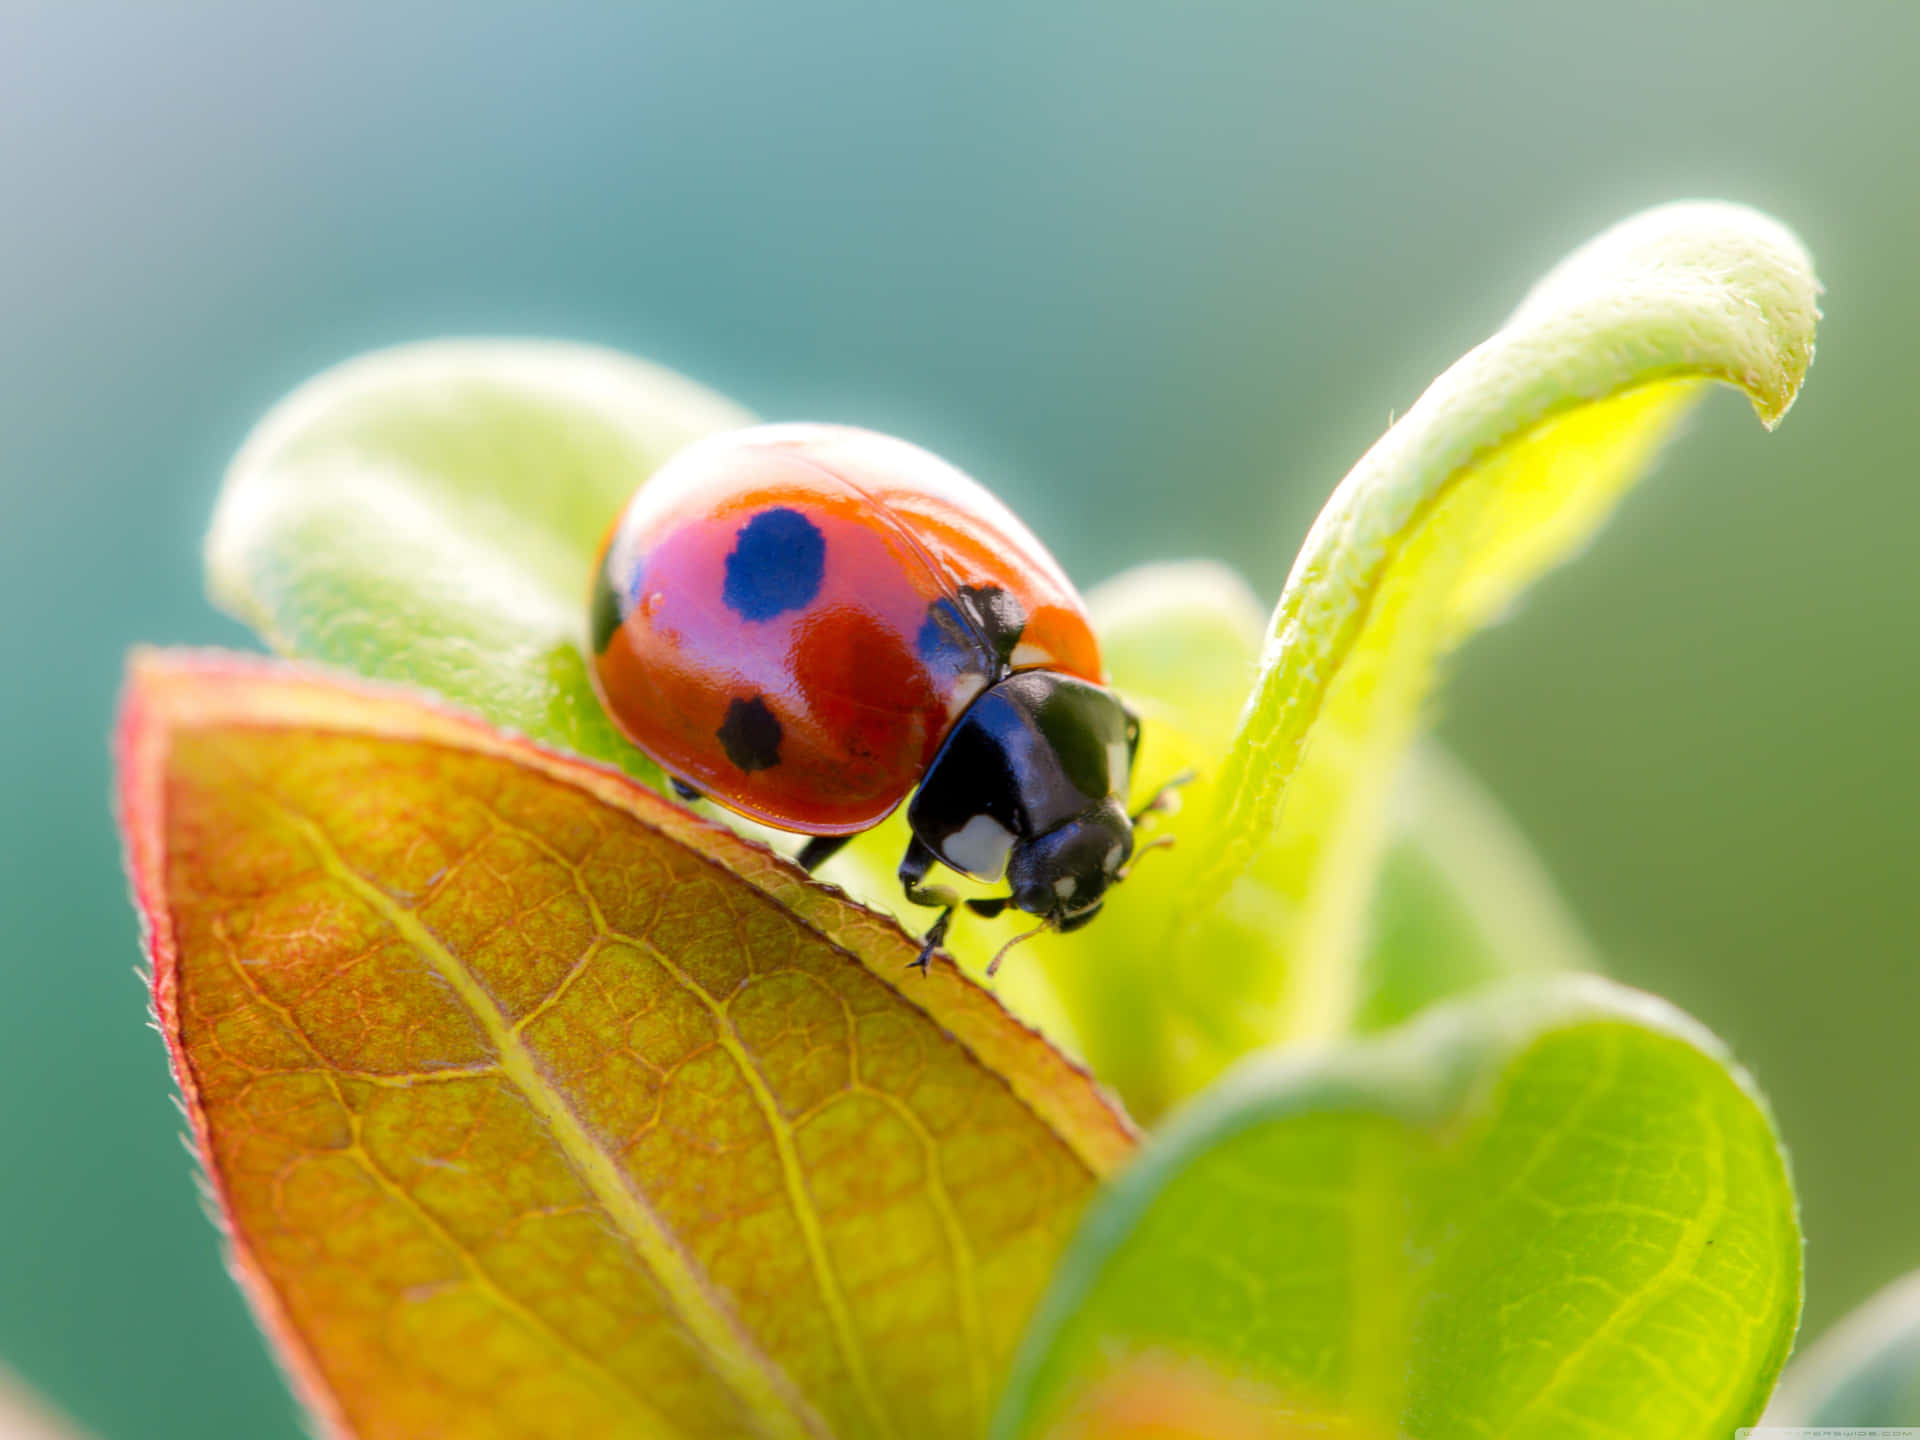 "Rediscover your creativity with the Ladybug Iphone!" Wallpaper